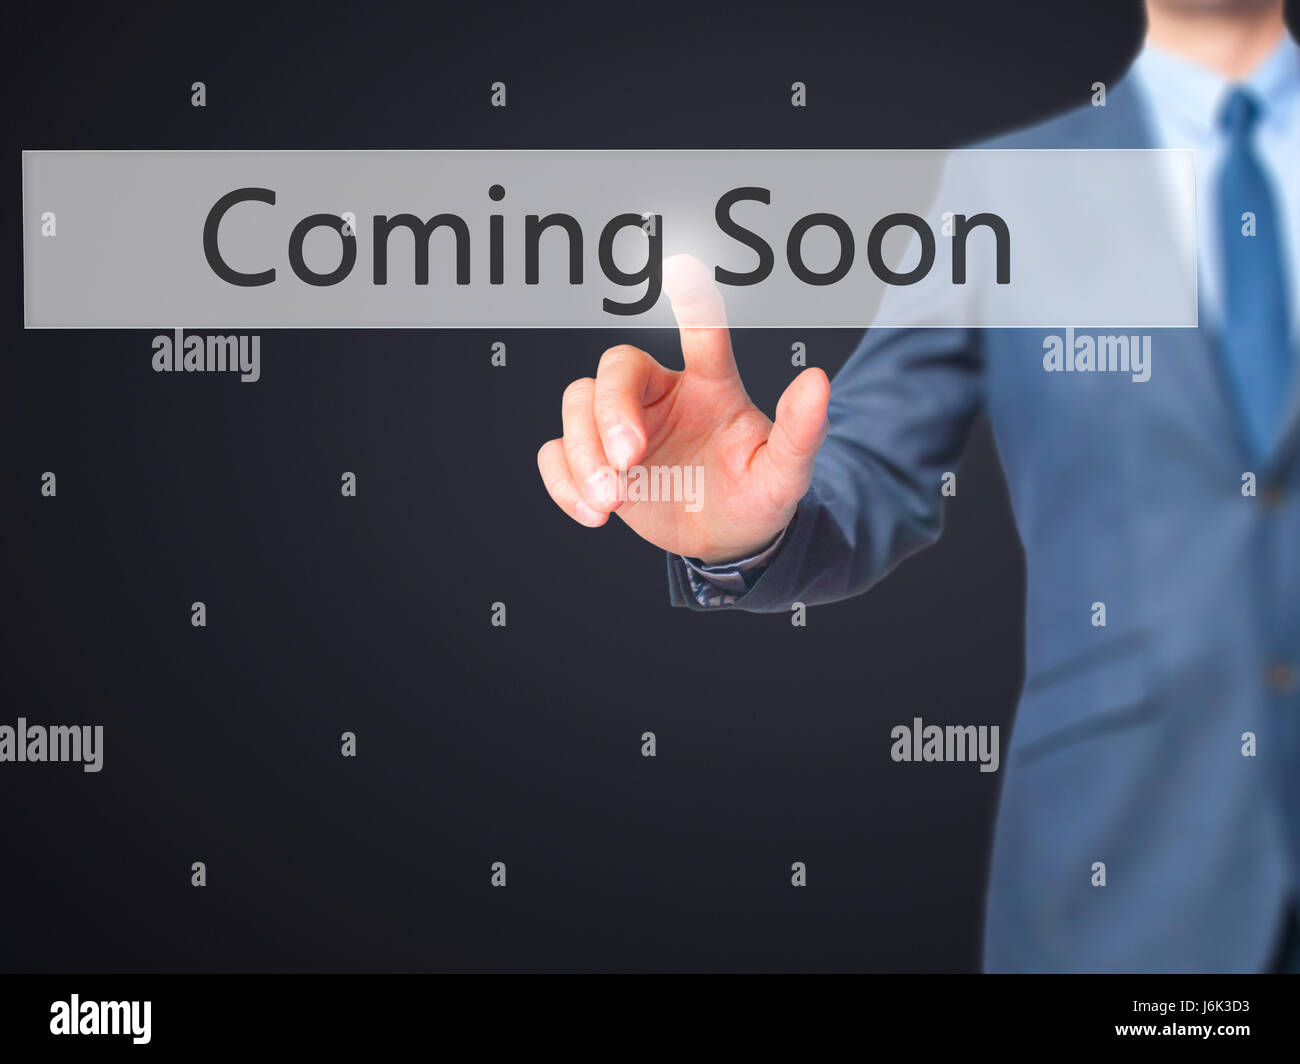 Coming Soon - Businessman click on virtual touchscreen. Business and IT concept. Stock Photo Stock Photo